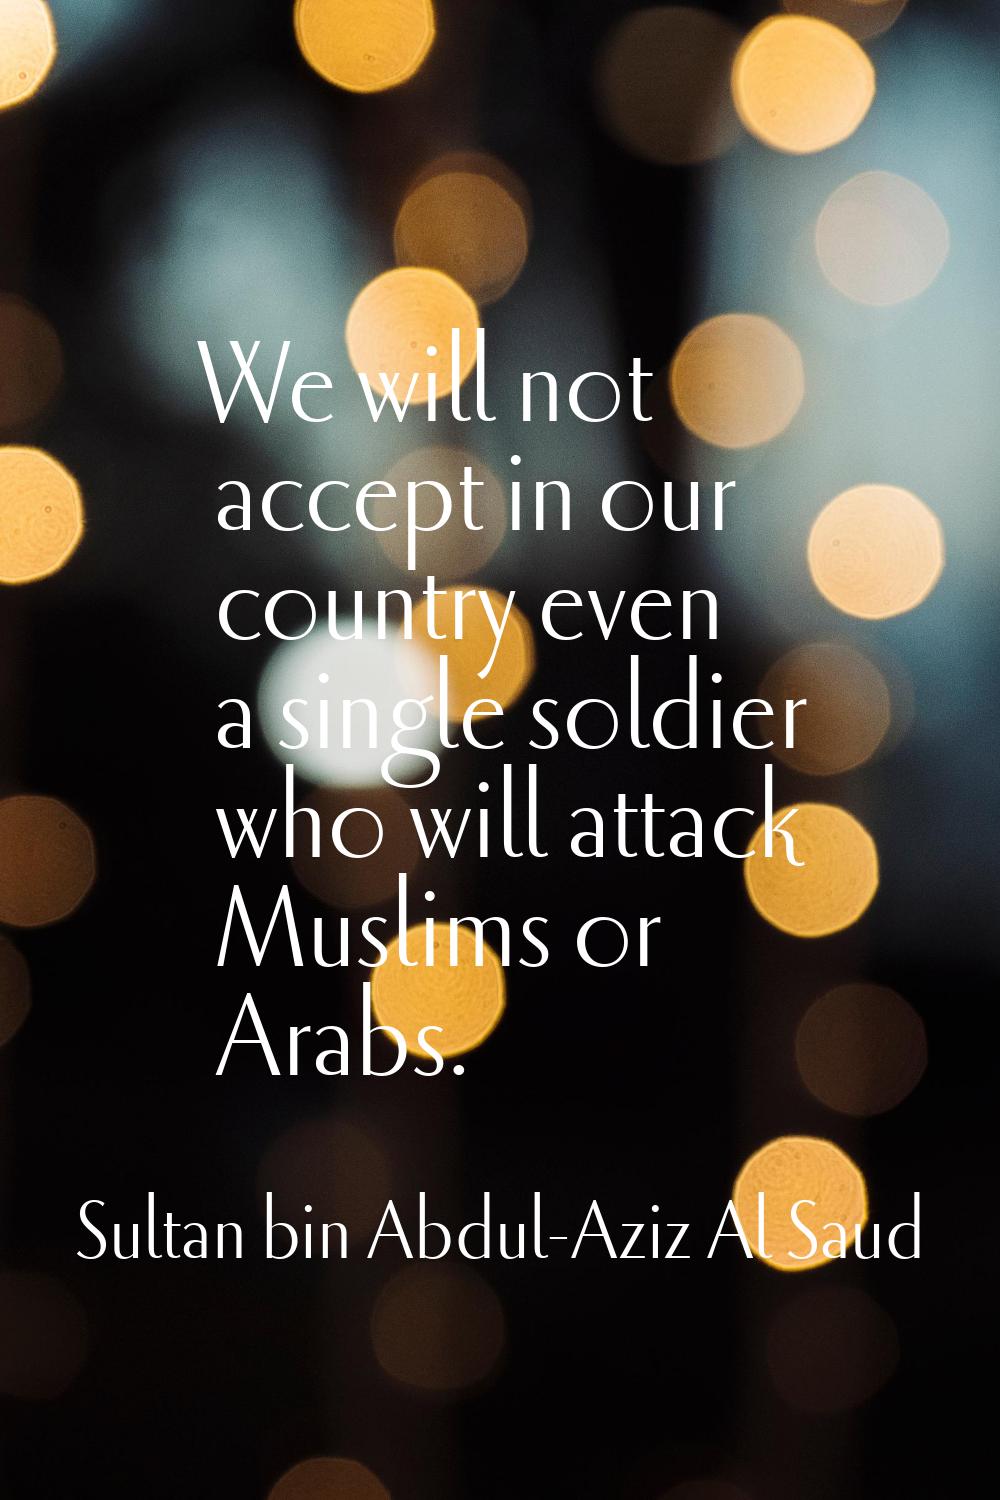 We will not accept in our country even a single soldier who will attack Muslims or Arabs.